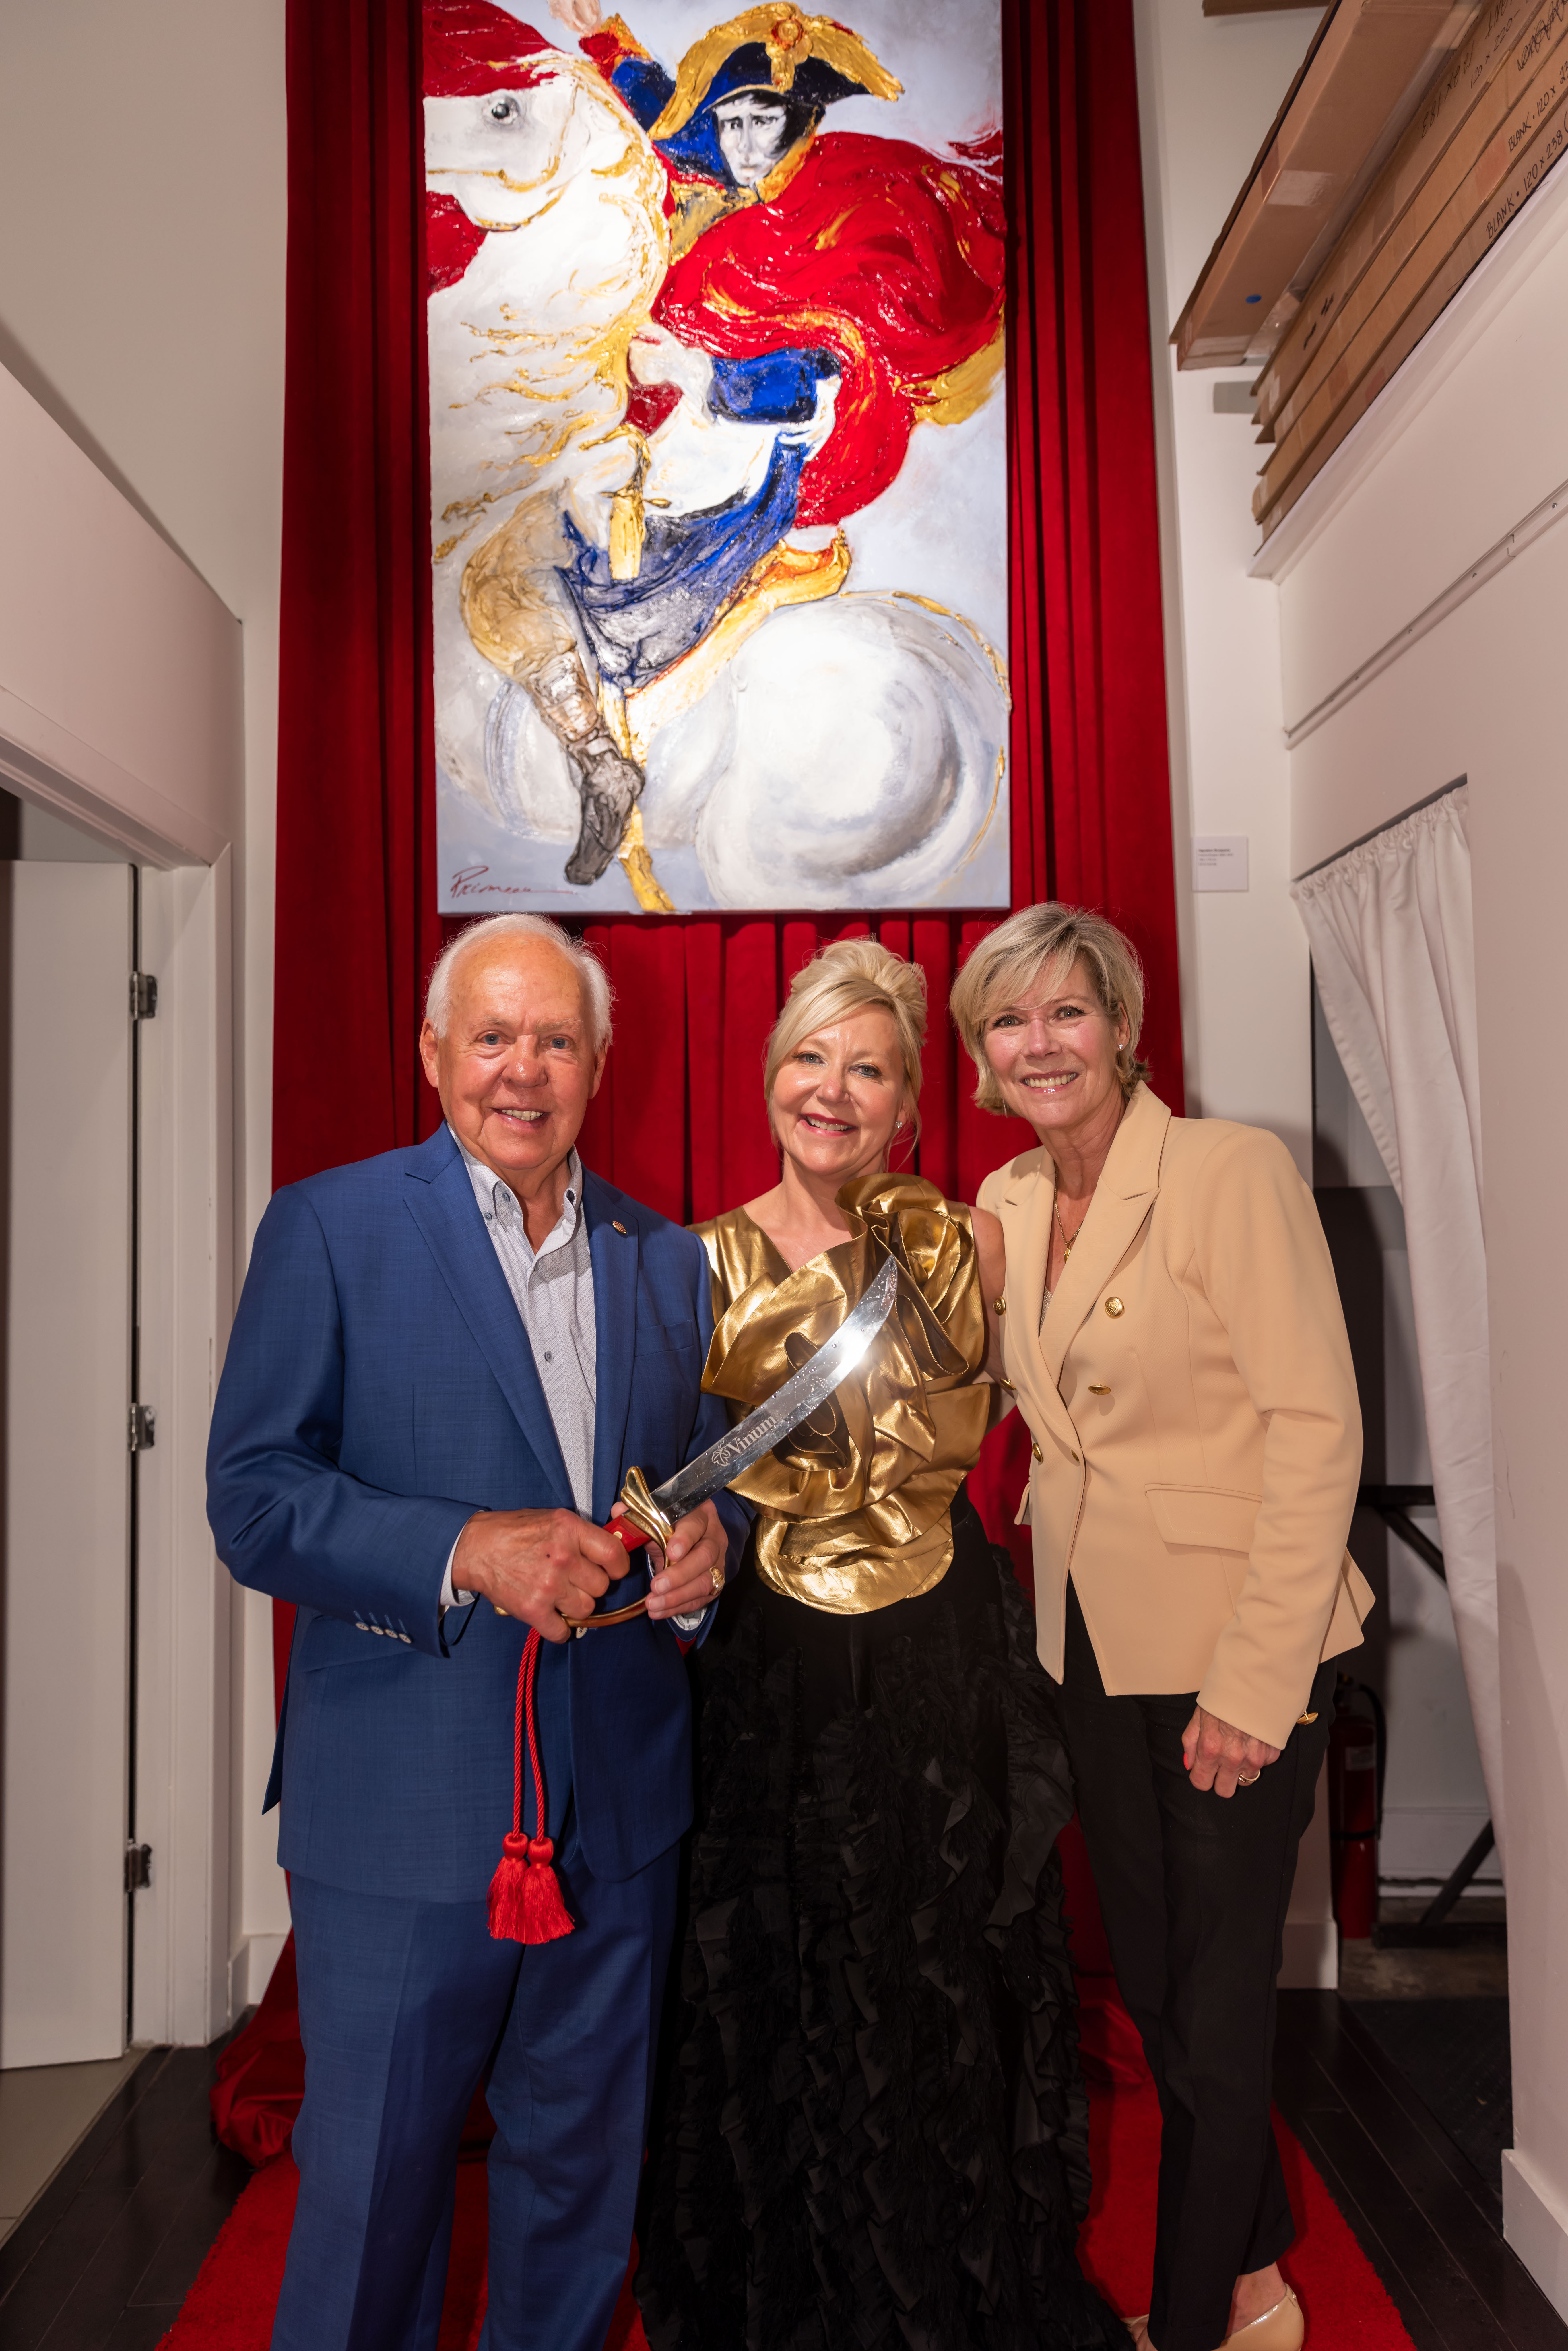 The inauguration of the Primeau Gallery
7 june 2023